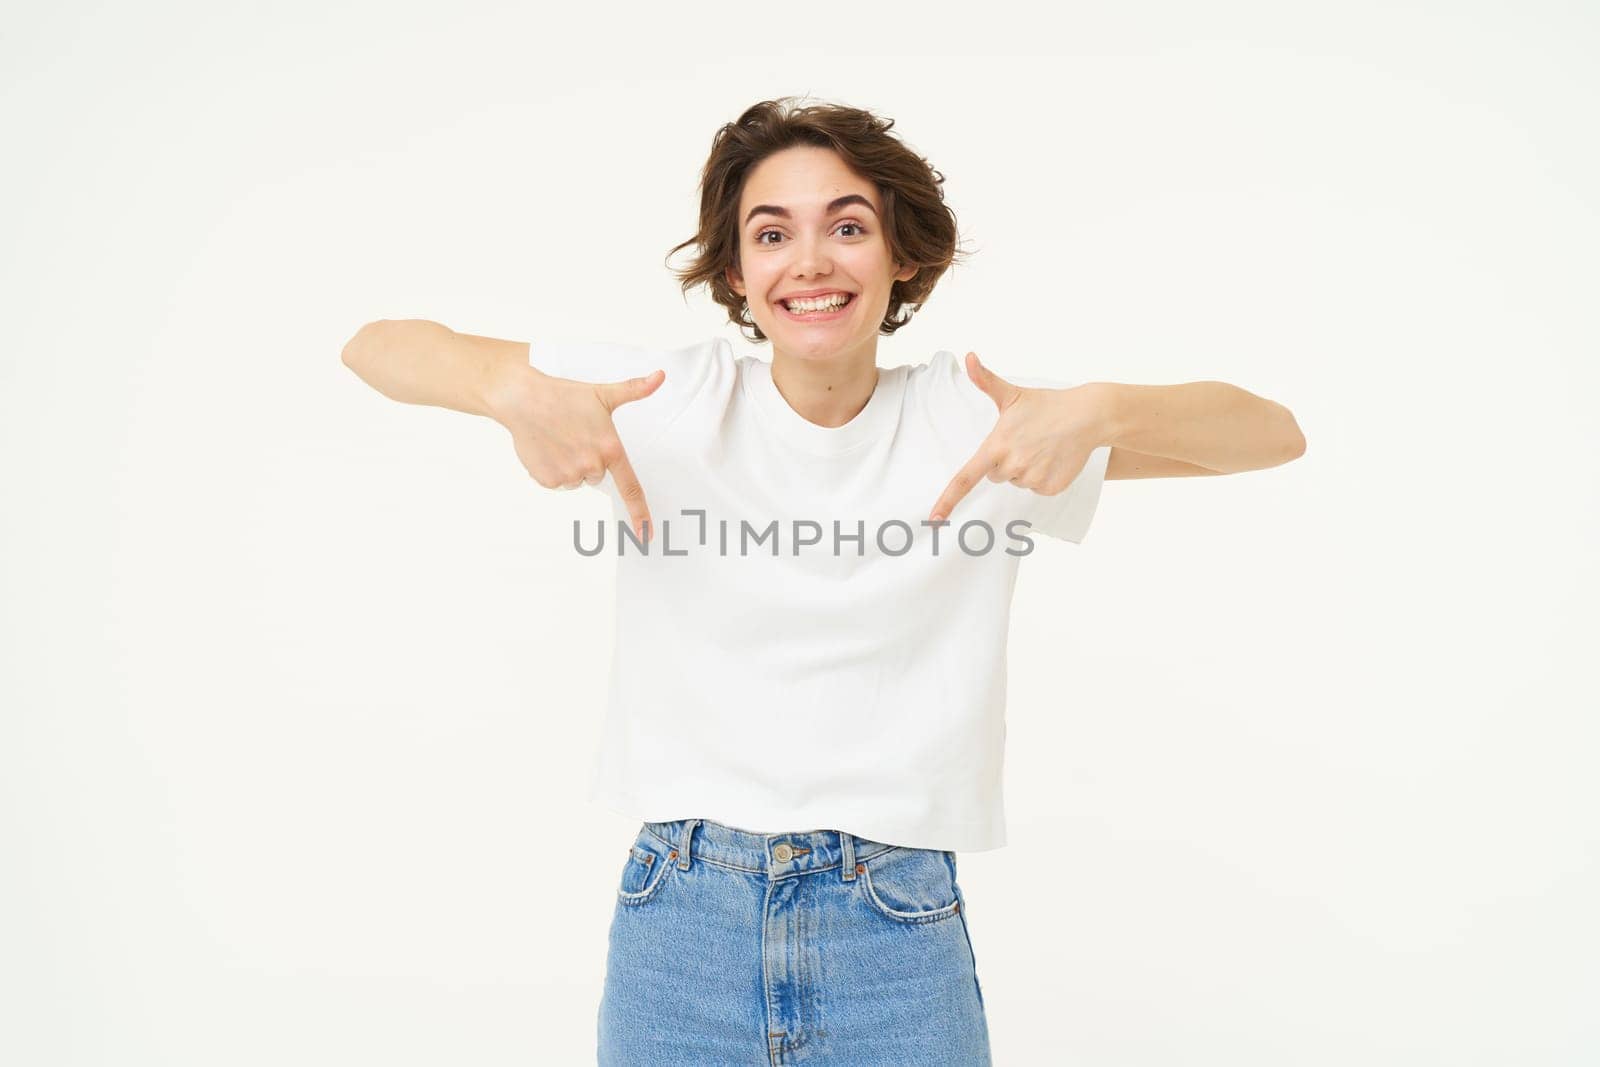 Portrait of cute, happy young woman pointing fingers down, showing advertisement, demonstrating banner on the bottom, standing against white background.